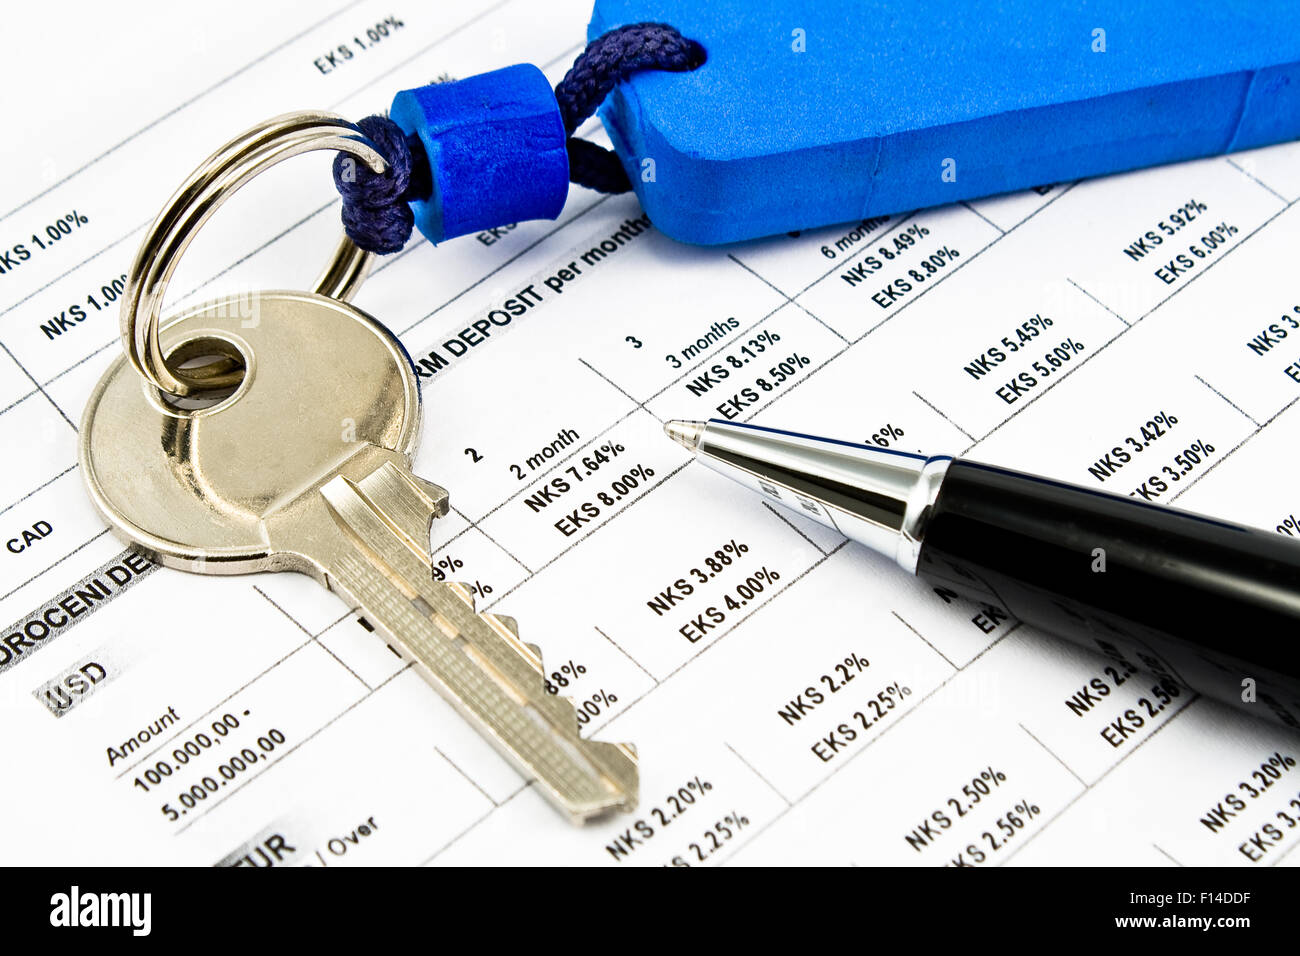 Pen, House key and Interest rates on bank loans Stock Photo